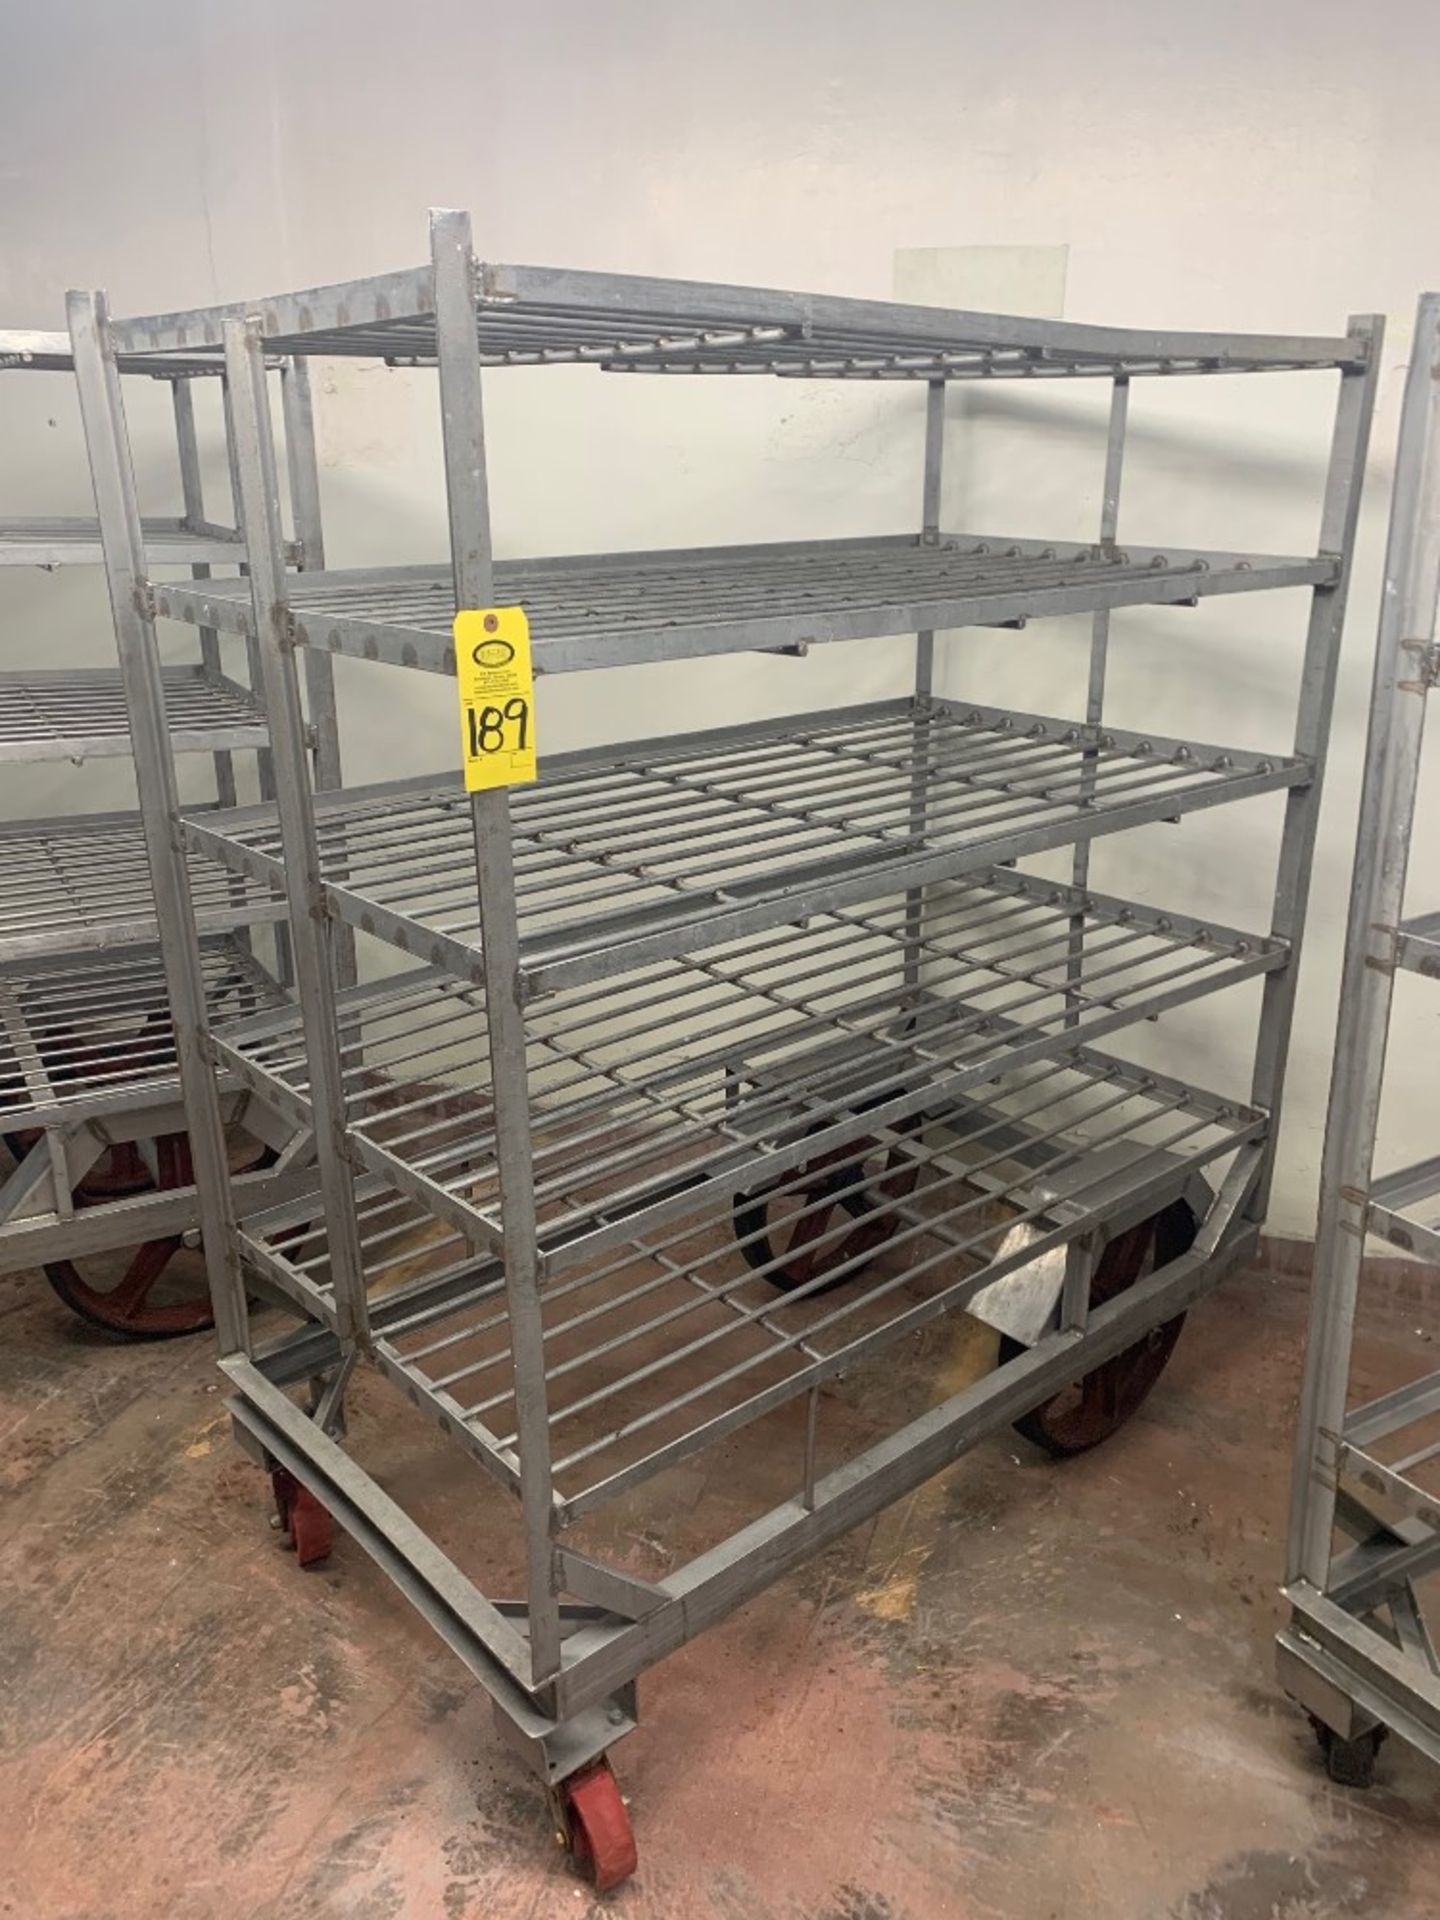 Stainless Steel Cart, 34" W X 62" X 6' T, 5-shelves, 20" rear wheels: Required Loading Fee $100.